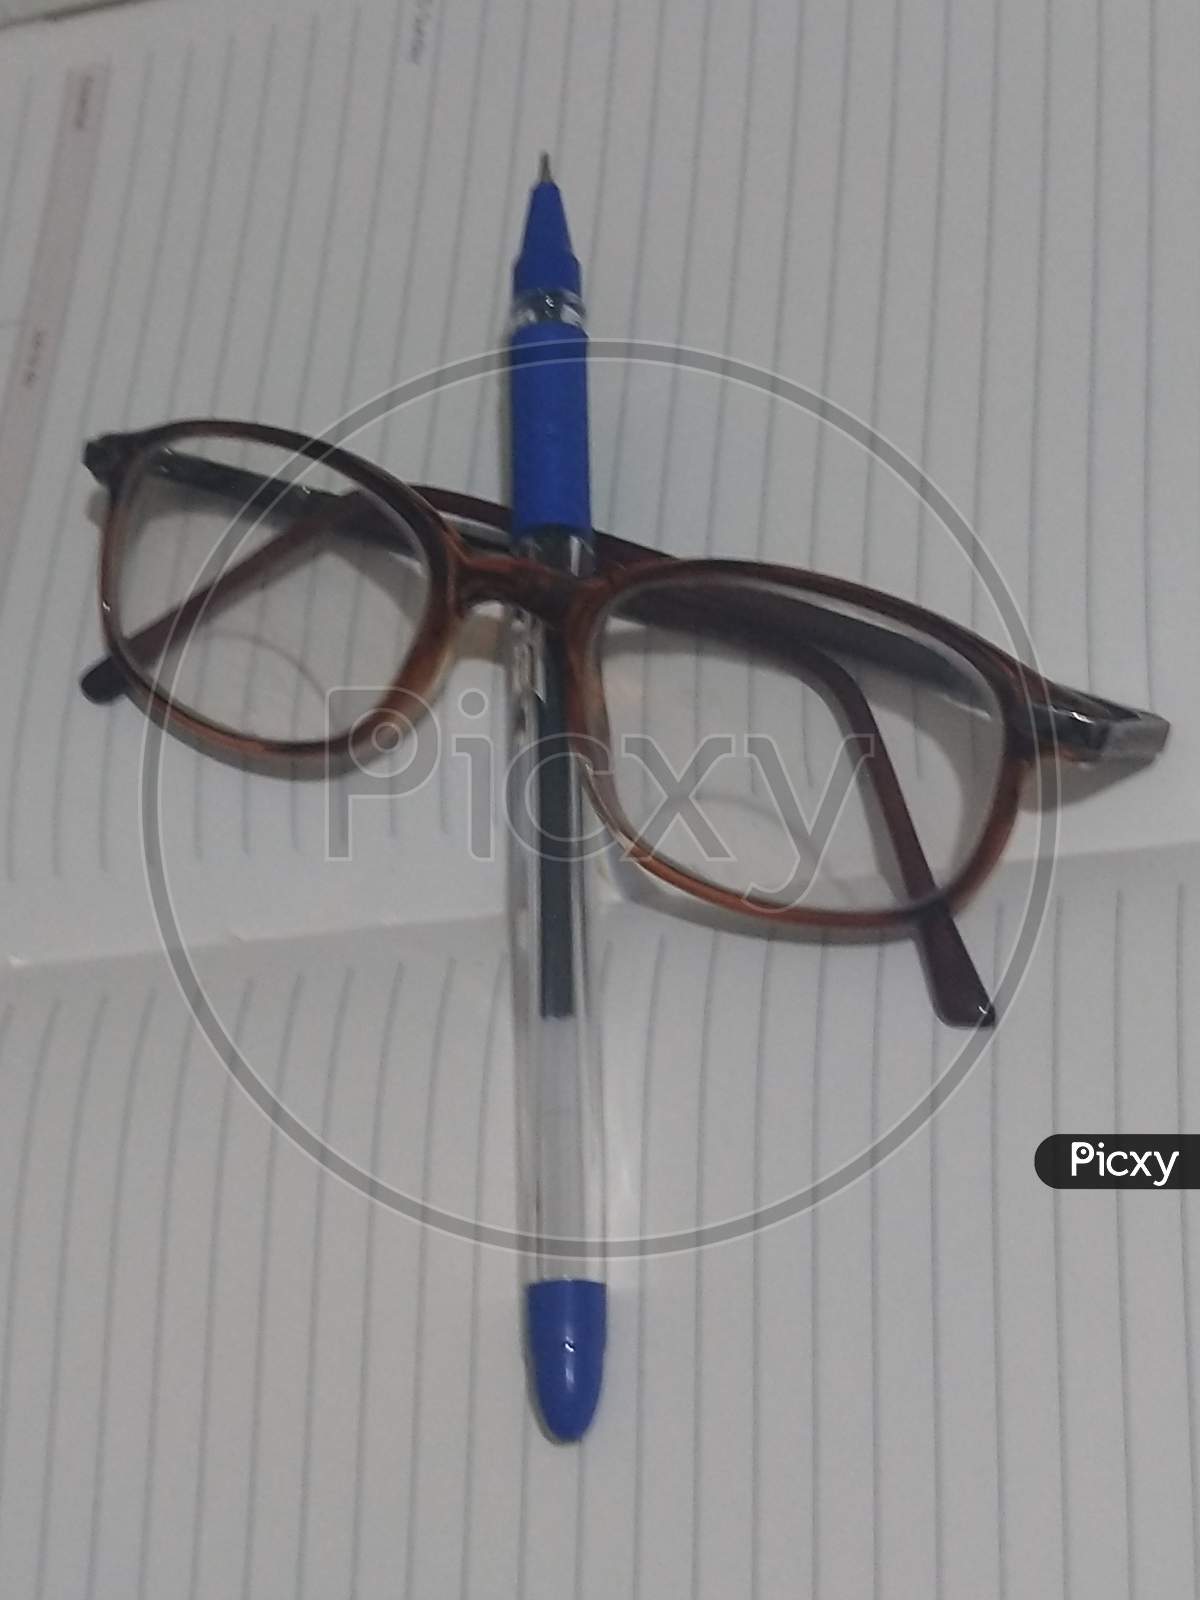 Goggle and ball pen on open pages of diary.